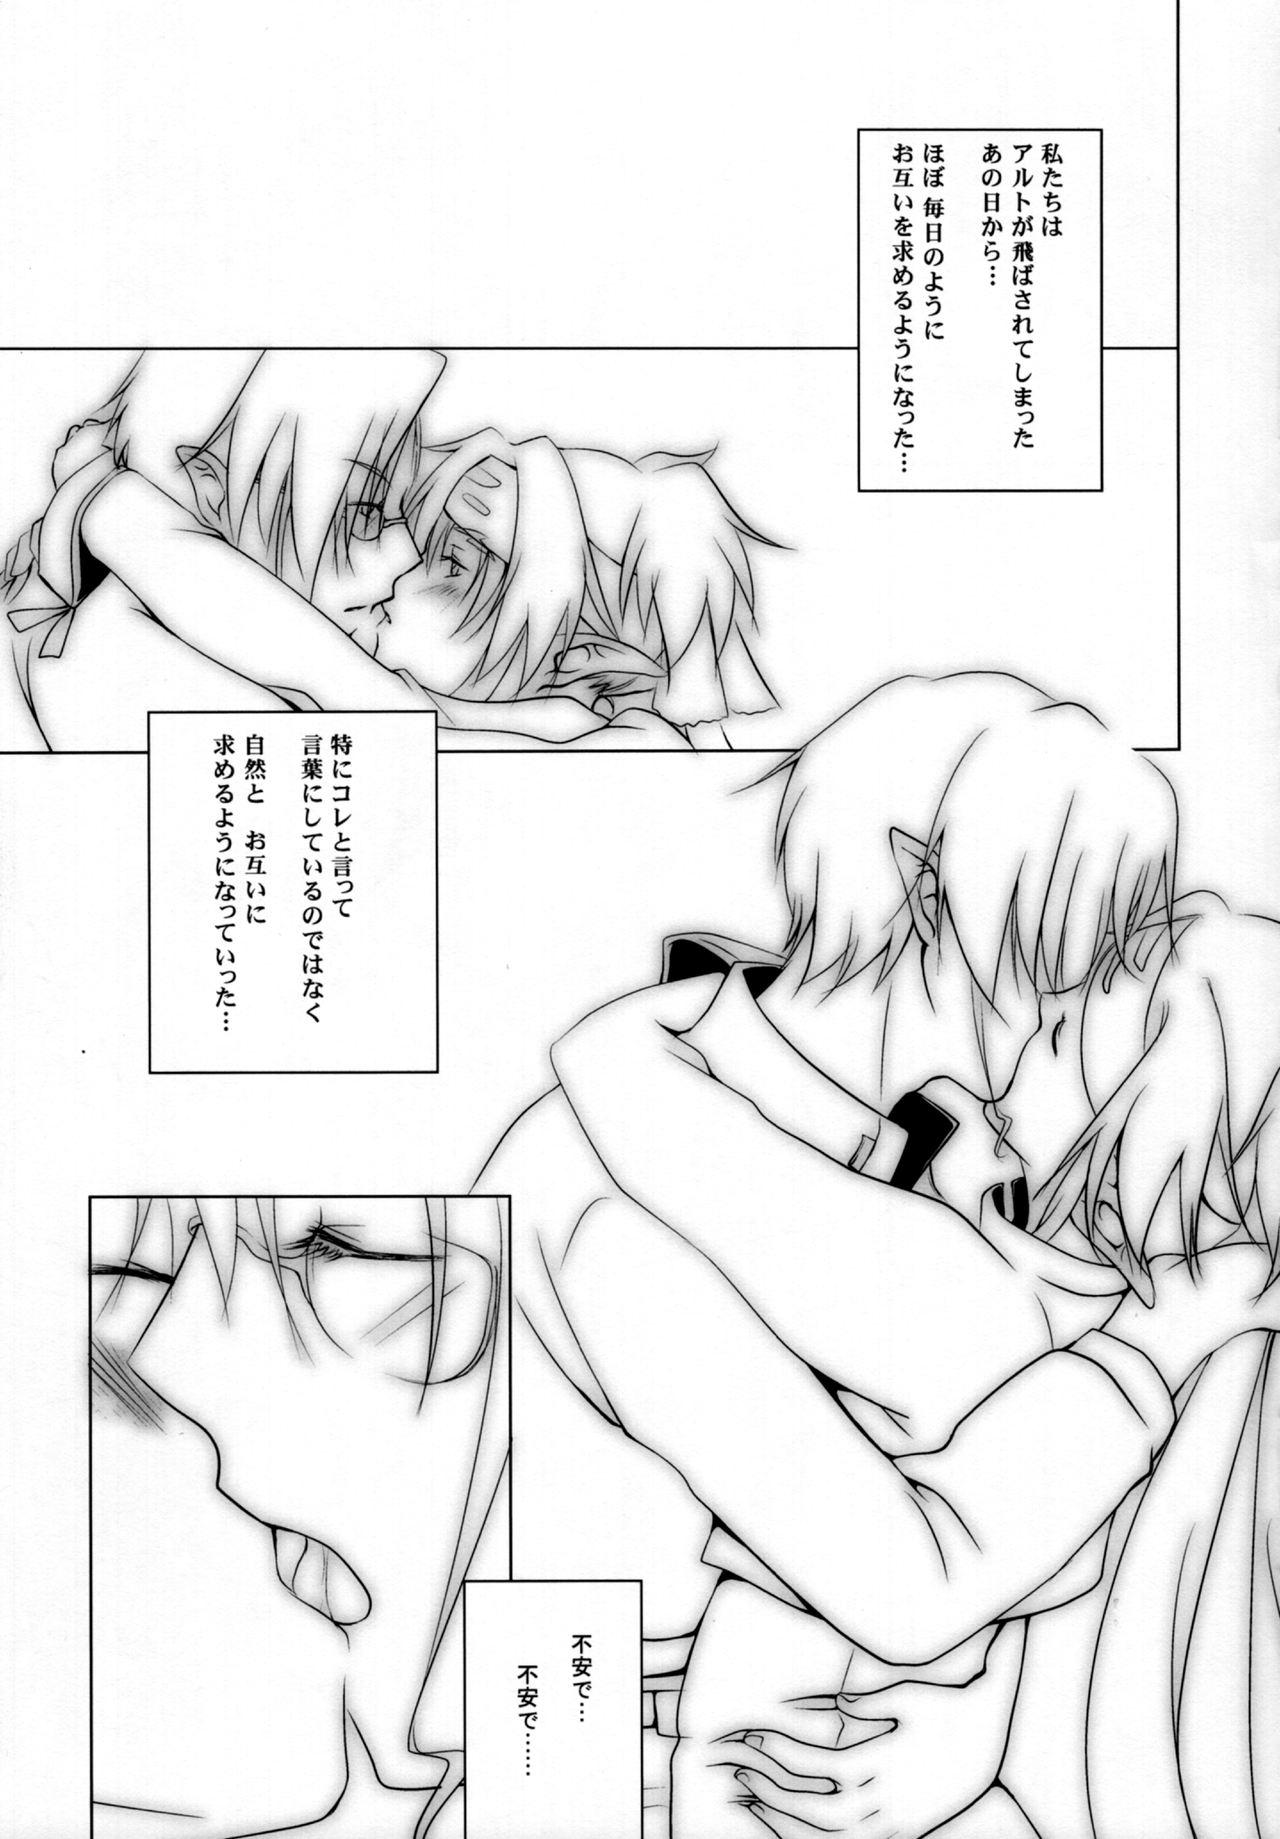 Transvestite Ever moment with you - Macross frontier Gay Pawn - Page 2